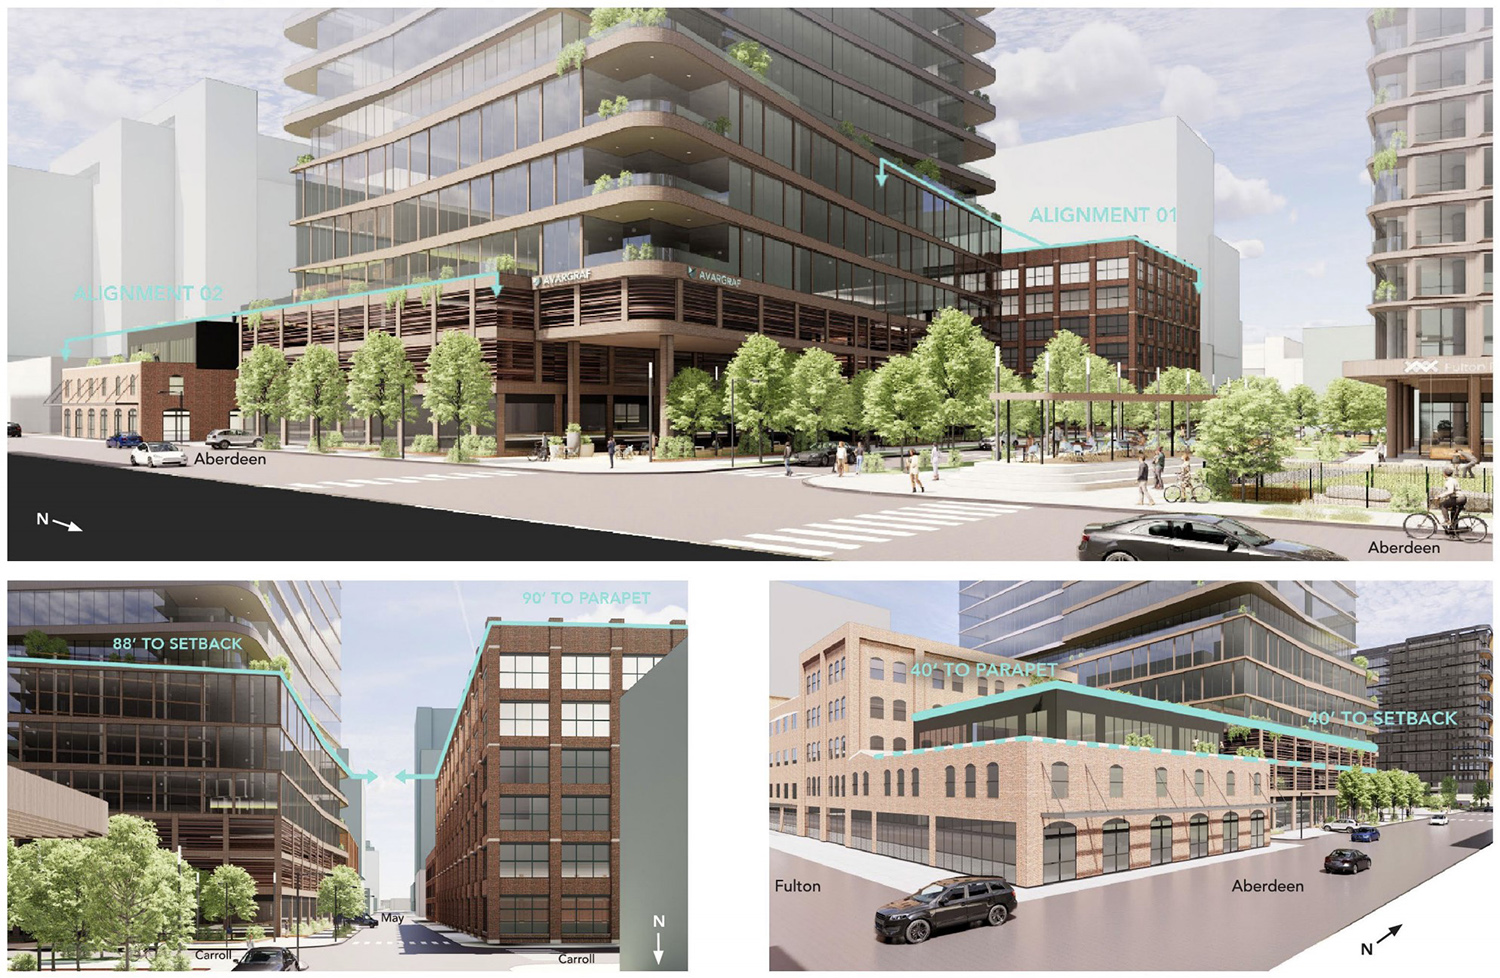 View of Massing Alignments of 315 N May Street. Rendering by ESG Architects